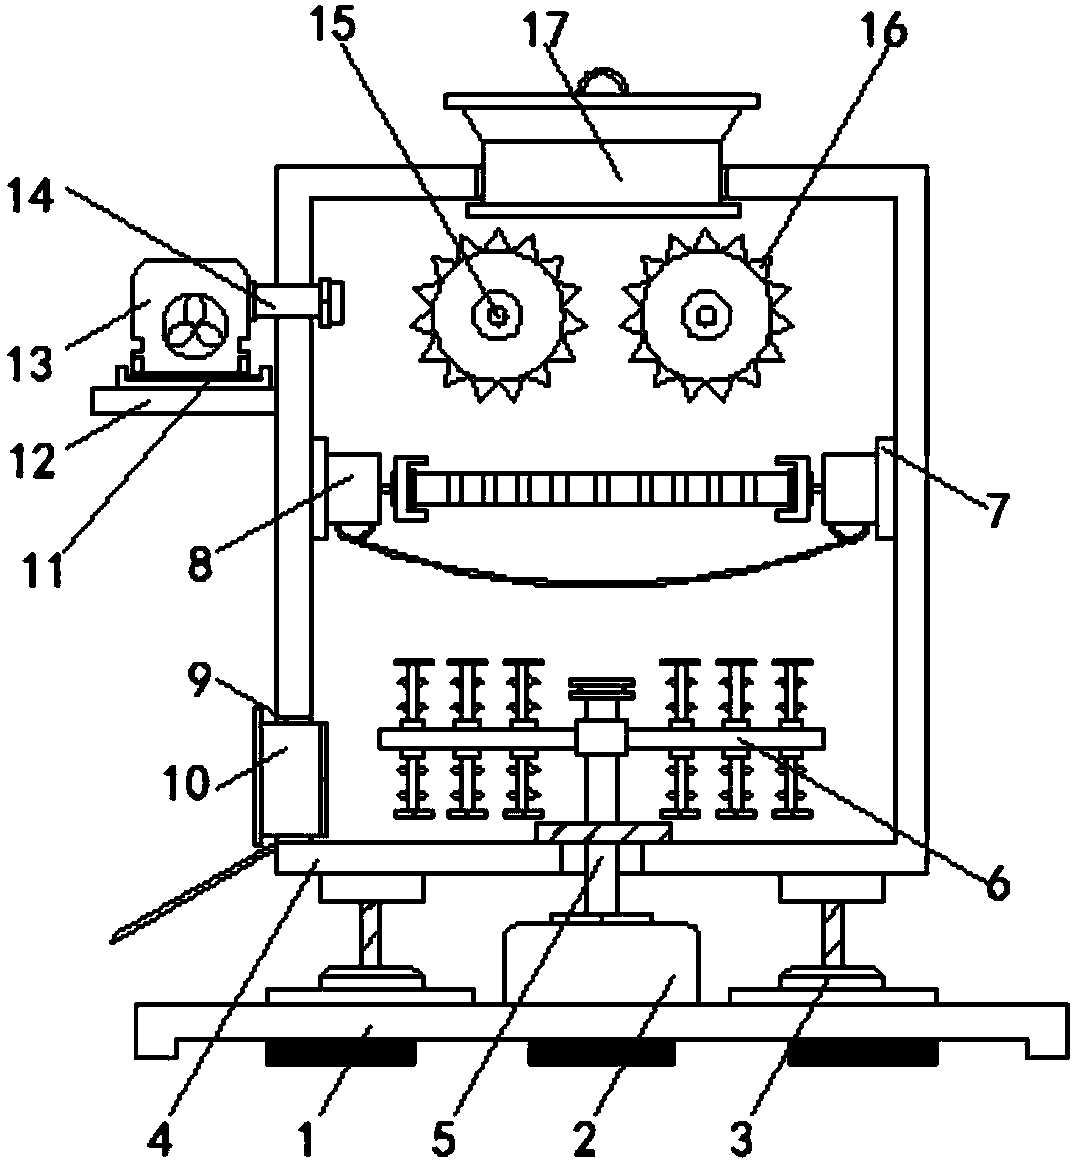 Asphalt mixing device for road pavement